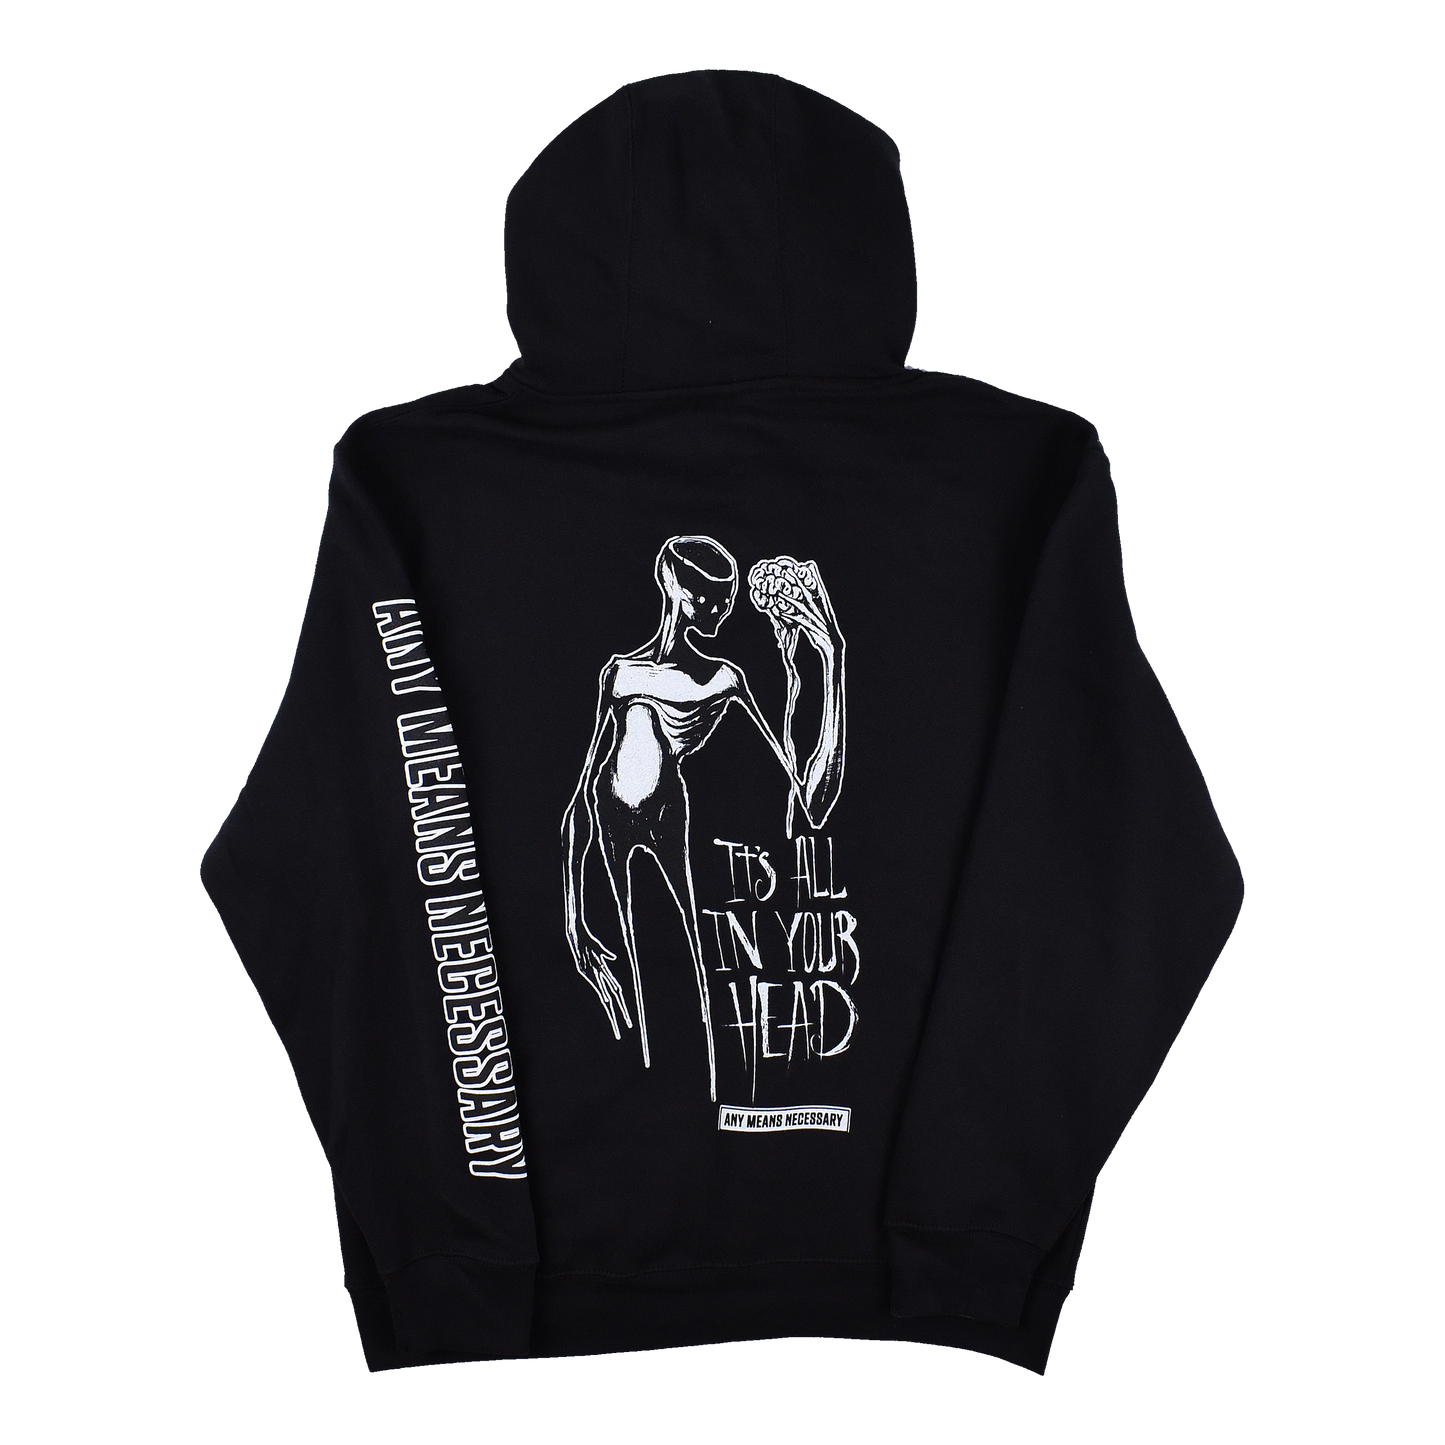 any means necessary shawn coss it's all in your head pullover hoodie black